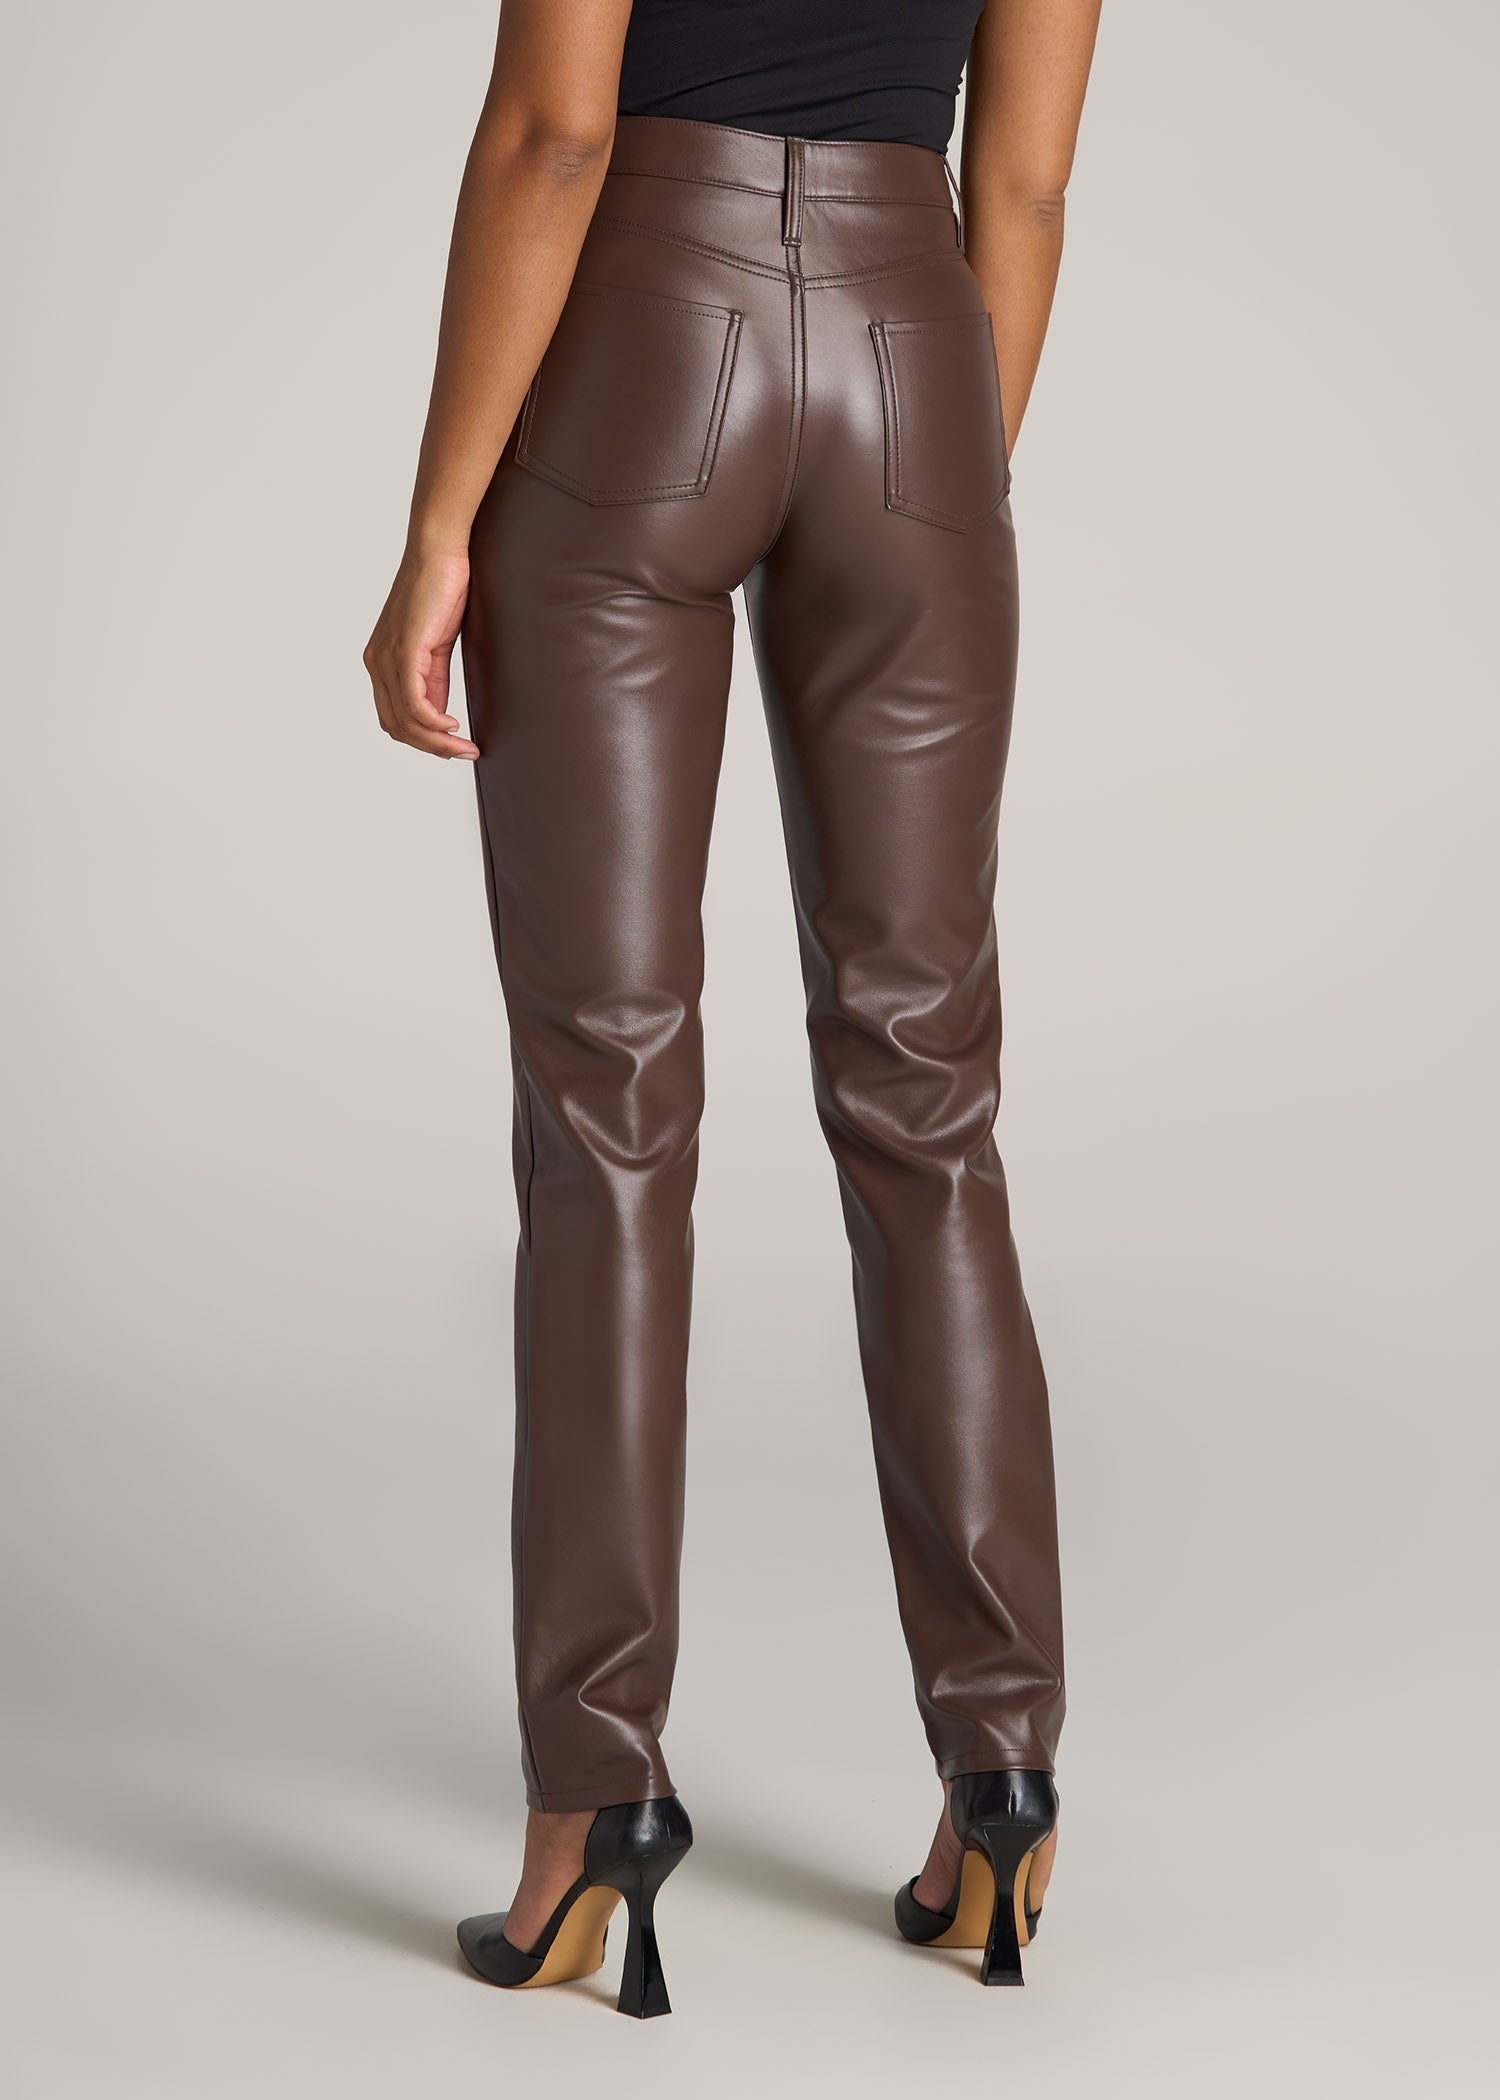 Shop Tight Leather Pants Women with great discounts and prices